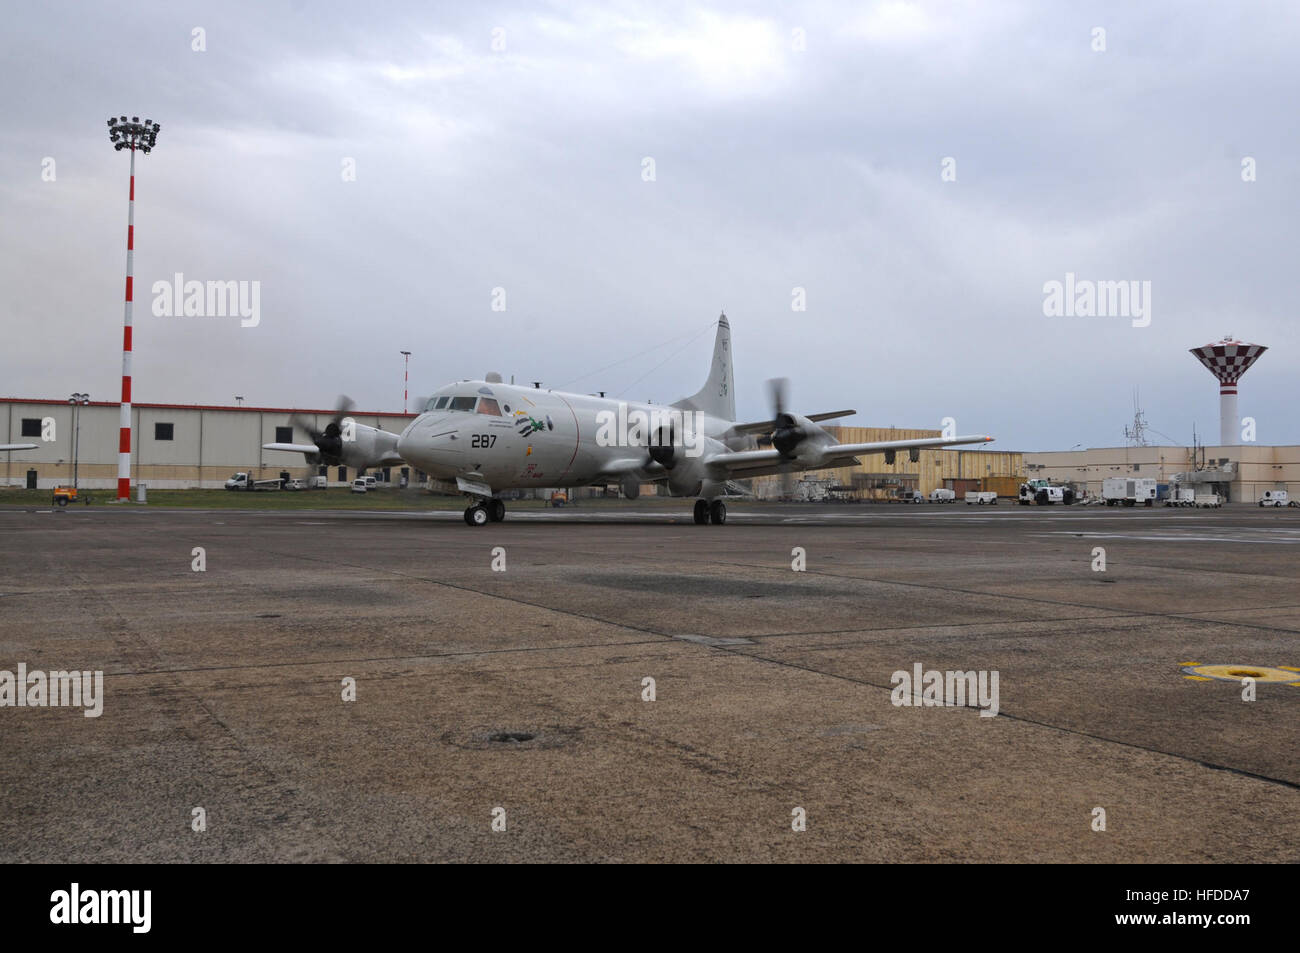 160519-N-AL293-047 SIGONELLA, Sicily (May 19, 2016) A P-3 Orion maritime patrol aircraft from Patrol Squadron (VP) Four taxis at Naval Air Station Sigonella, Sicily in preparation to take off in support of the search for Egyptair flight MS804.  The U.S. Navy is providing a P-3 Orion in support of the Hellenic Armed Forces, the Joint Rescue Coordination Center in Greece, in response to a request by the U.S. Embassy in Athens, Greece for assistance in the search of the missing Egyptian aircraft. (U.S. Navy photo by Mass Communication Specialist 2nd Class Devin  Menhardt/Released) U.S. Navy P-3 O Stock Photo